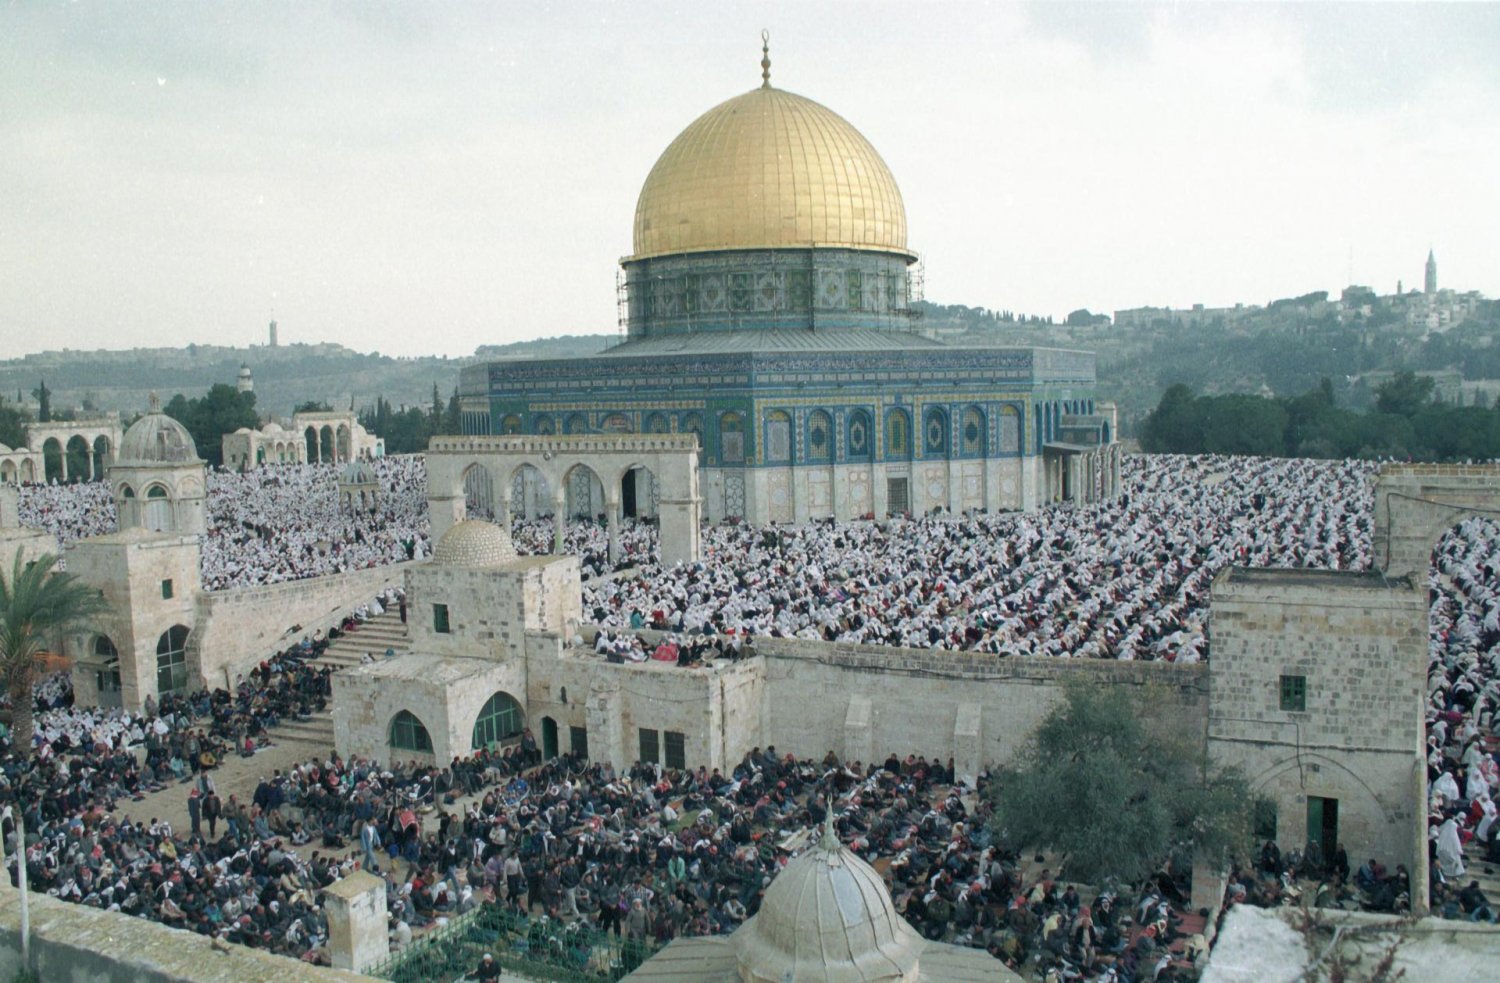 Muslims gather on the grounds of the al-Aqsa Mosque to perform Ramadan prayers in 1996.